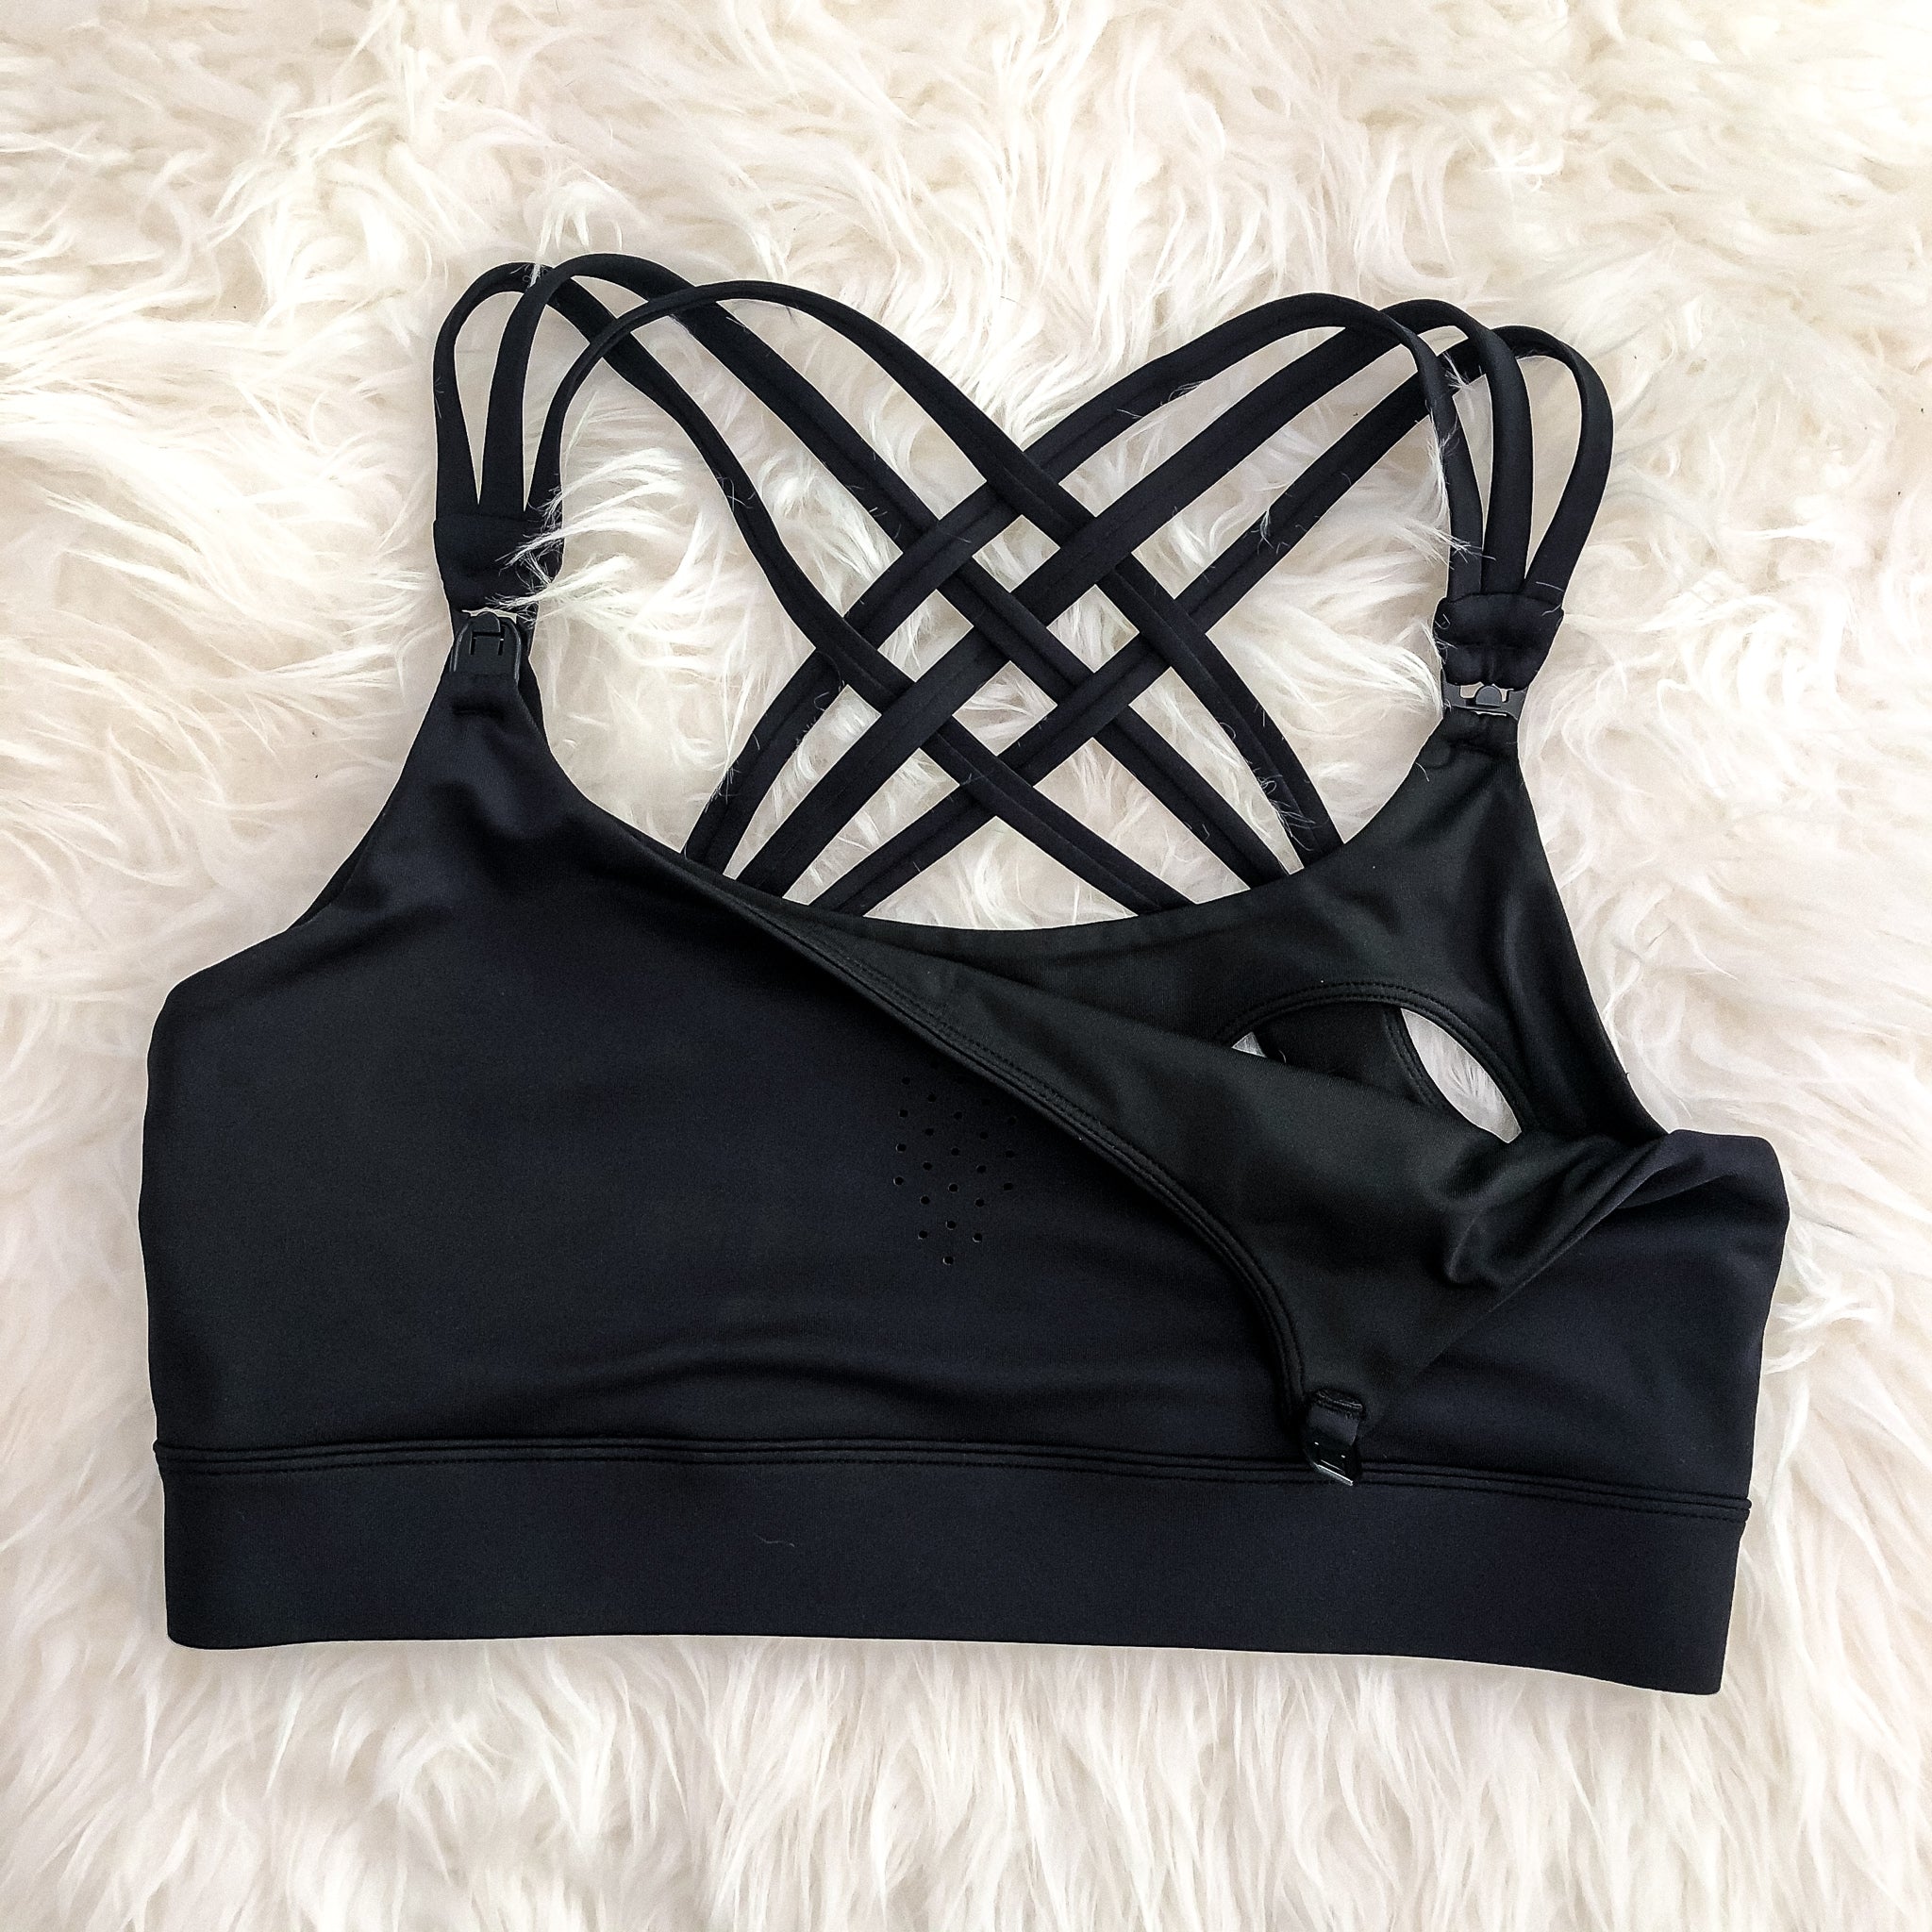 Lace Tube Bra with Criss-Cross Strapy Back